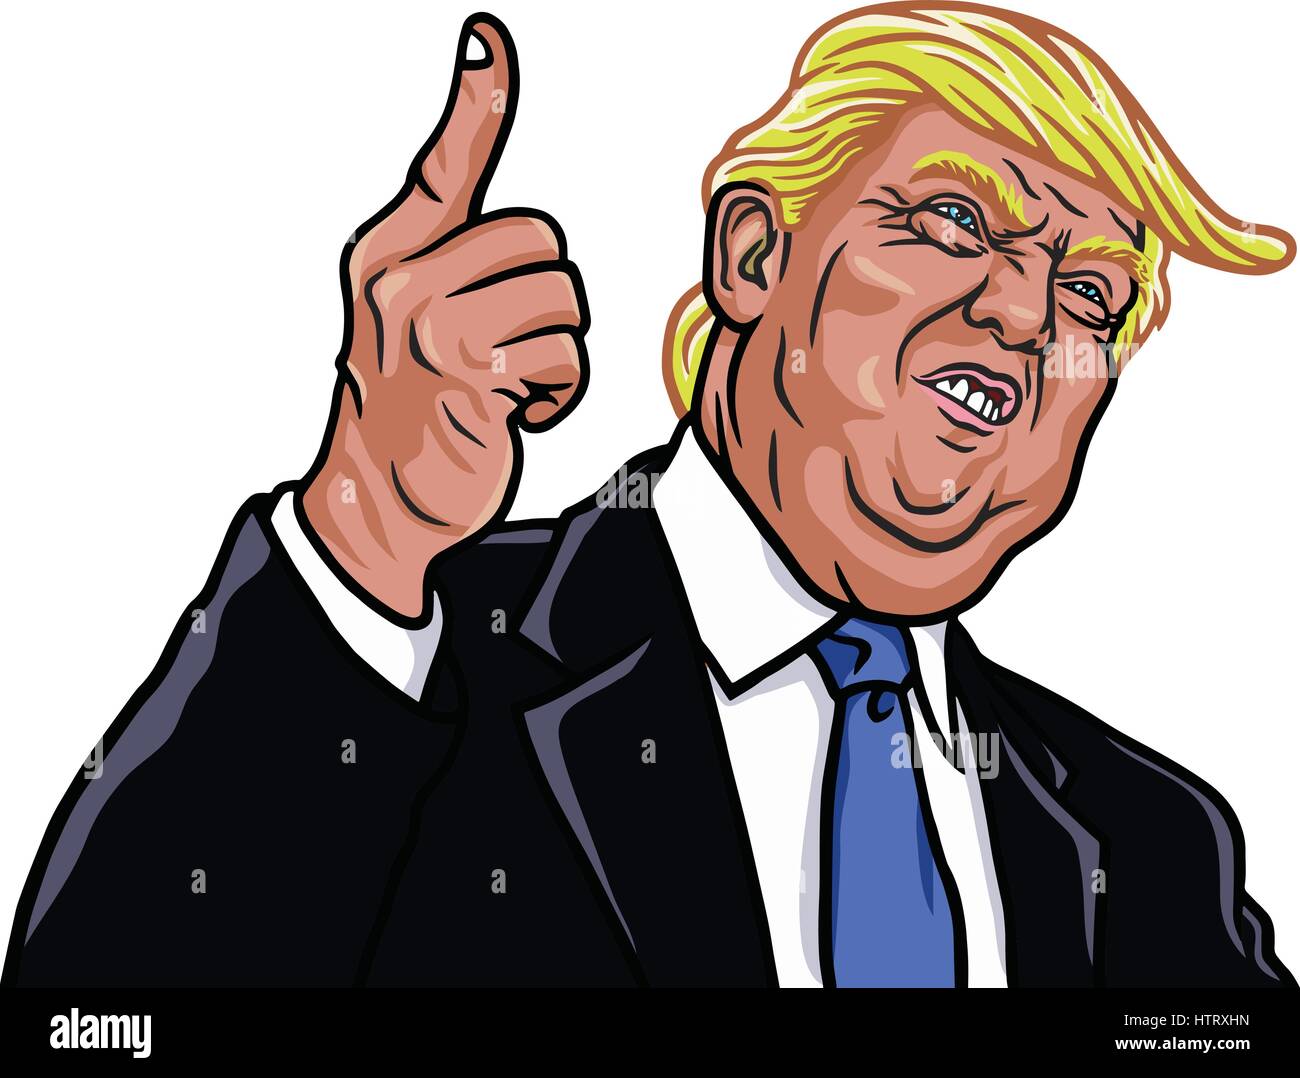 Donald Trump Vector Portrait Illustration. The 45th President of the United States. February 20, 2017 Stock Vector